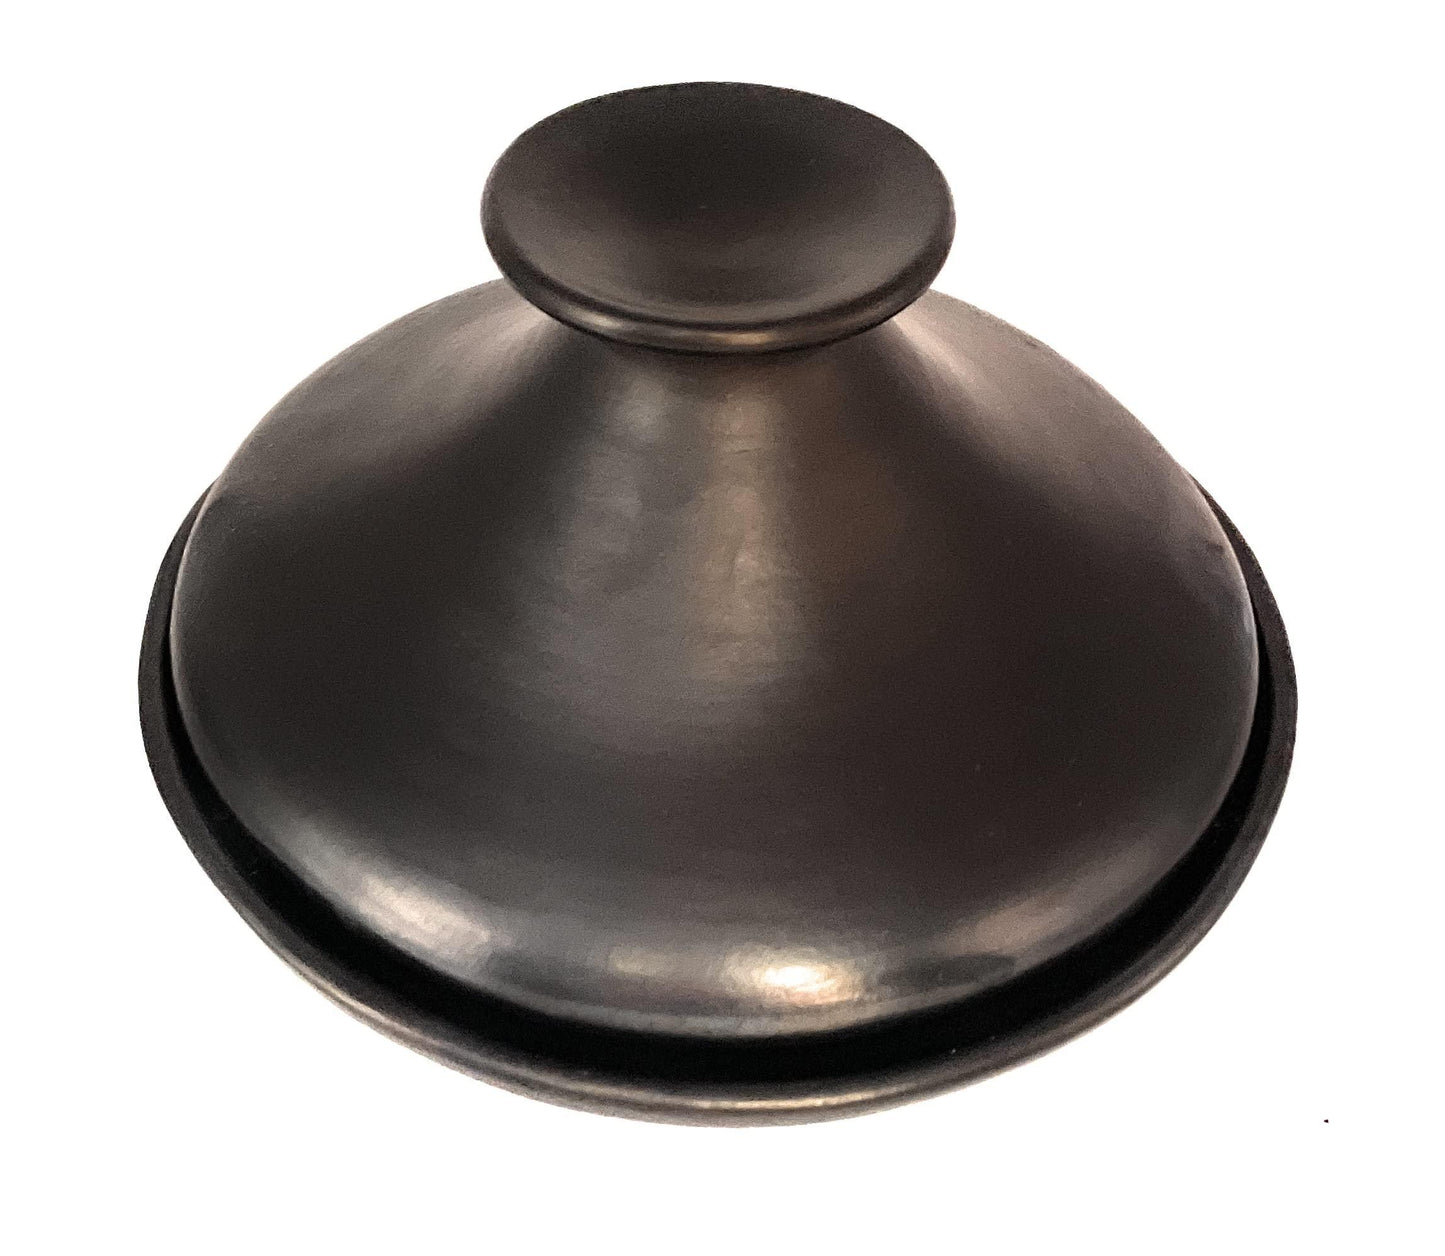 Clay Tagine for Cooking Tajin Tayin Unglazed Diameter 11.5" Aprox Hight 8" Black Clay 100% Handmade in Colombia Serving Pot - CookCave